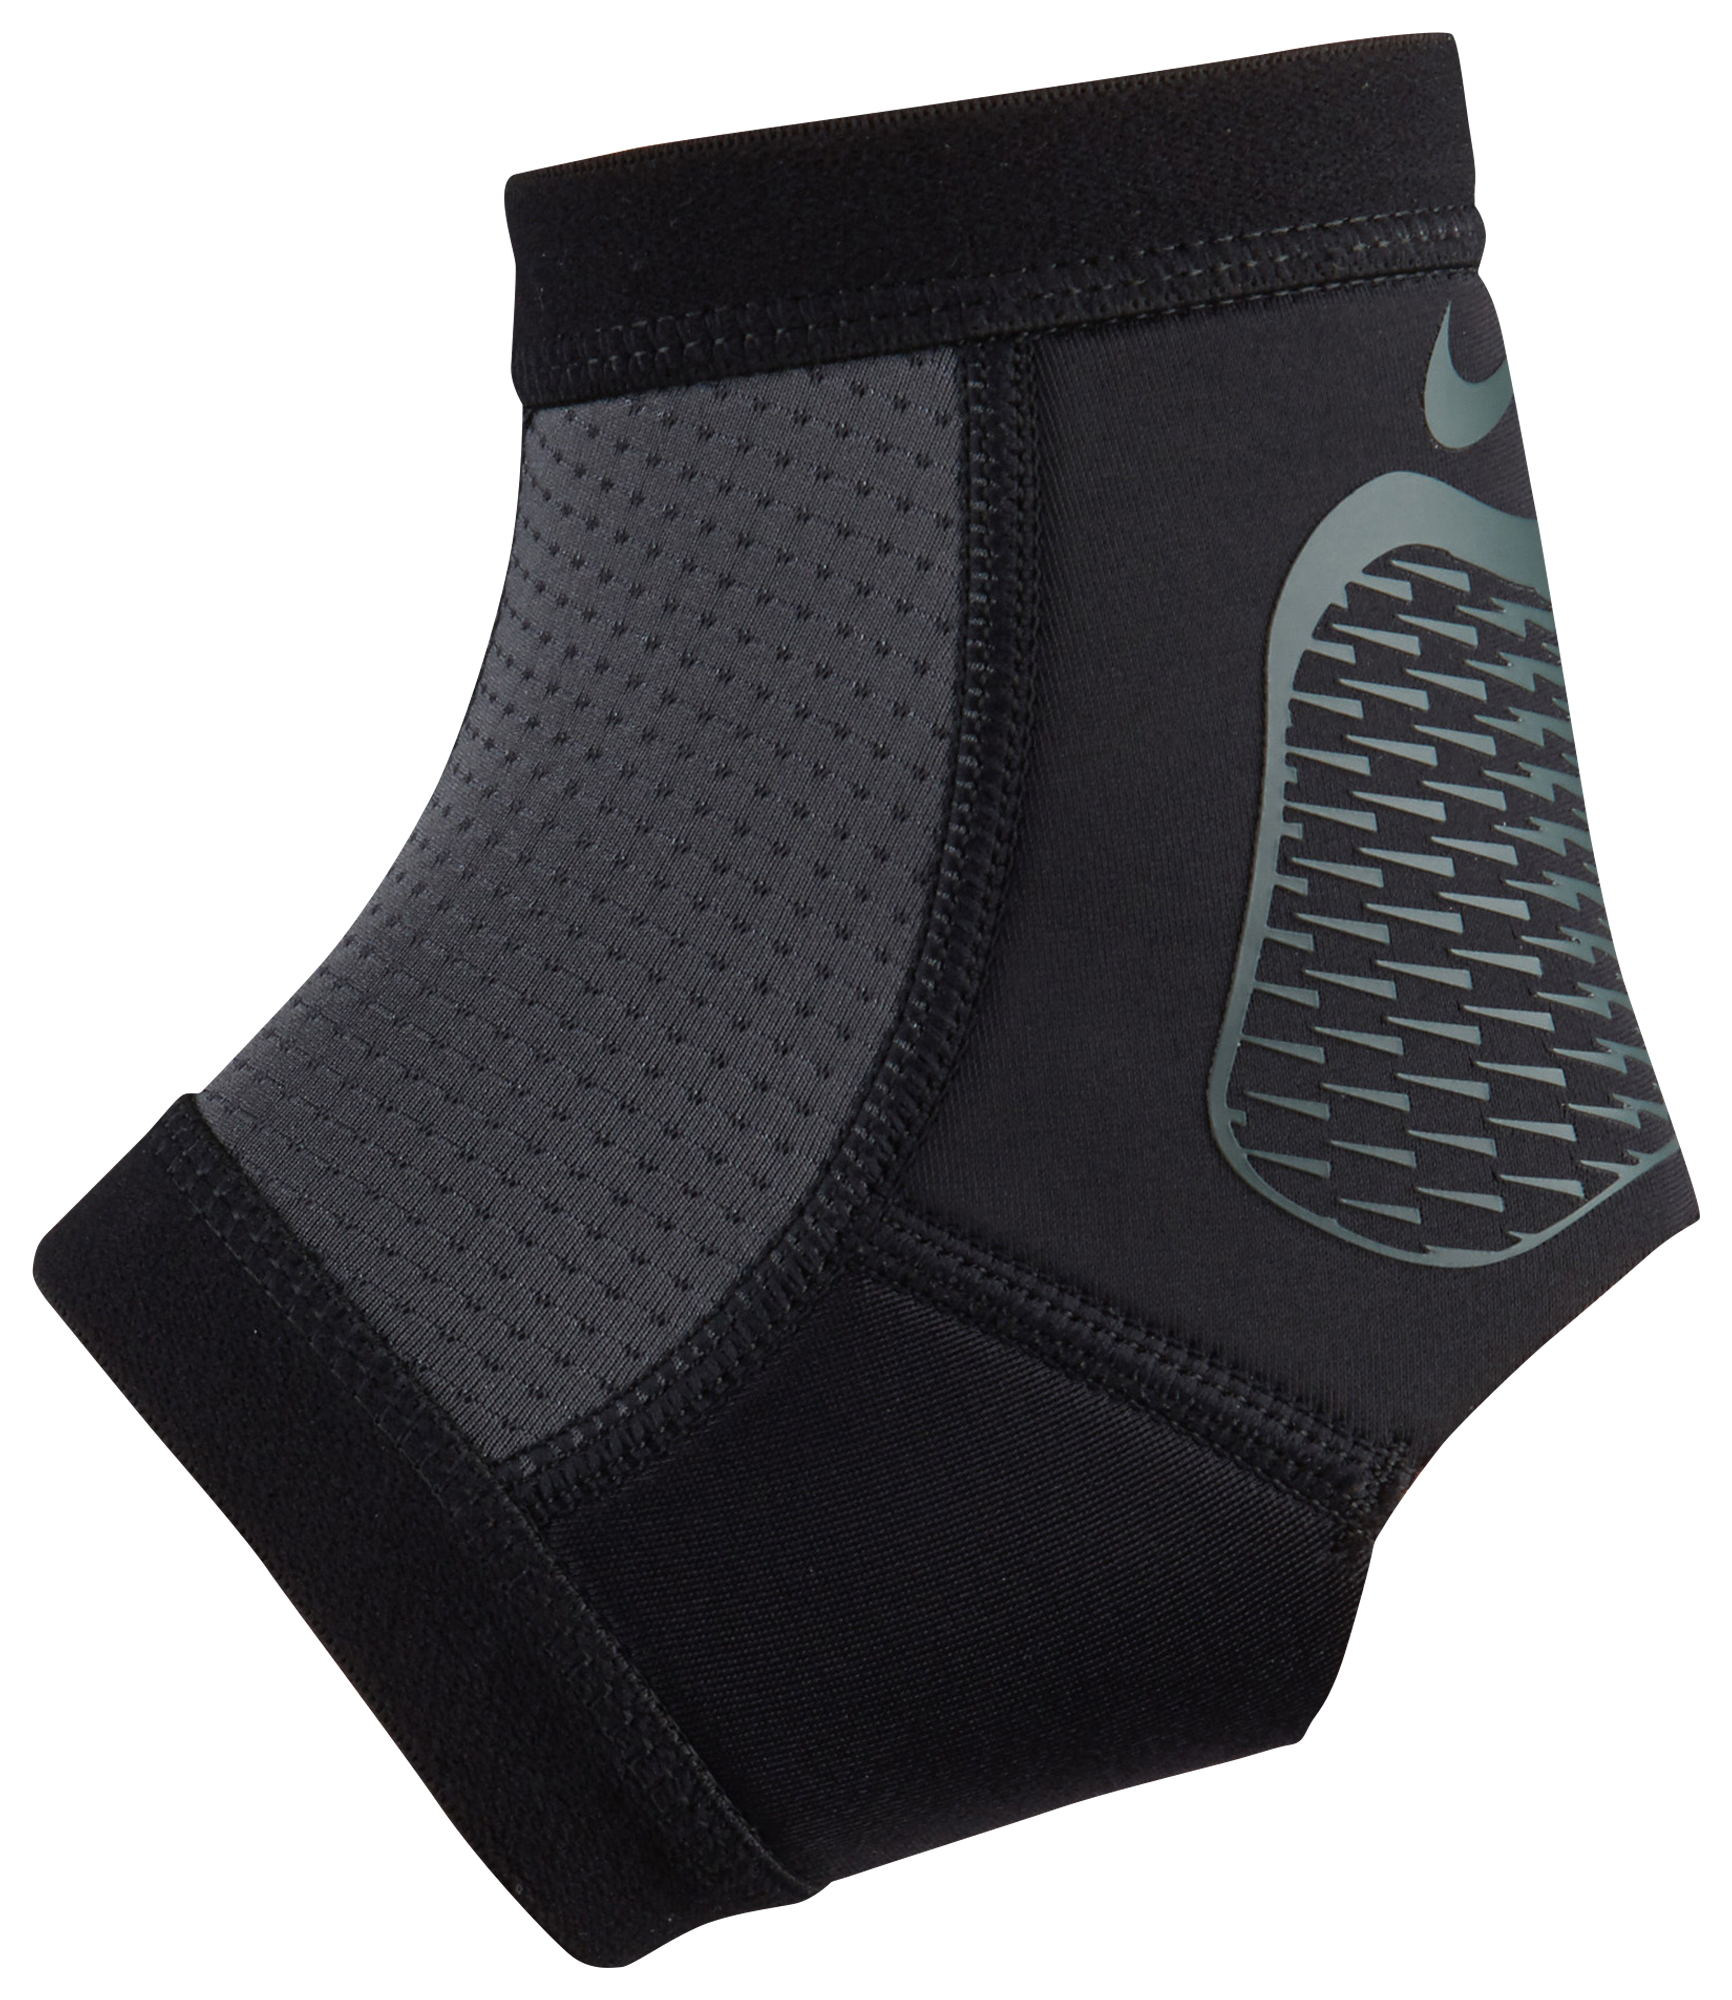 nike pro hyperstrong ankle sleeve 3.0 review